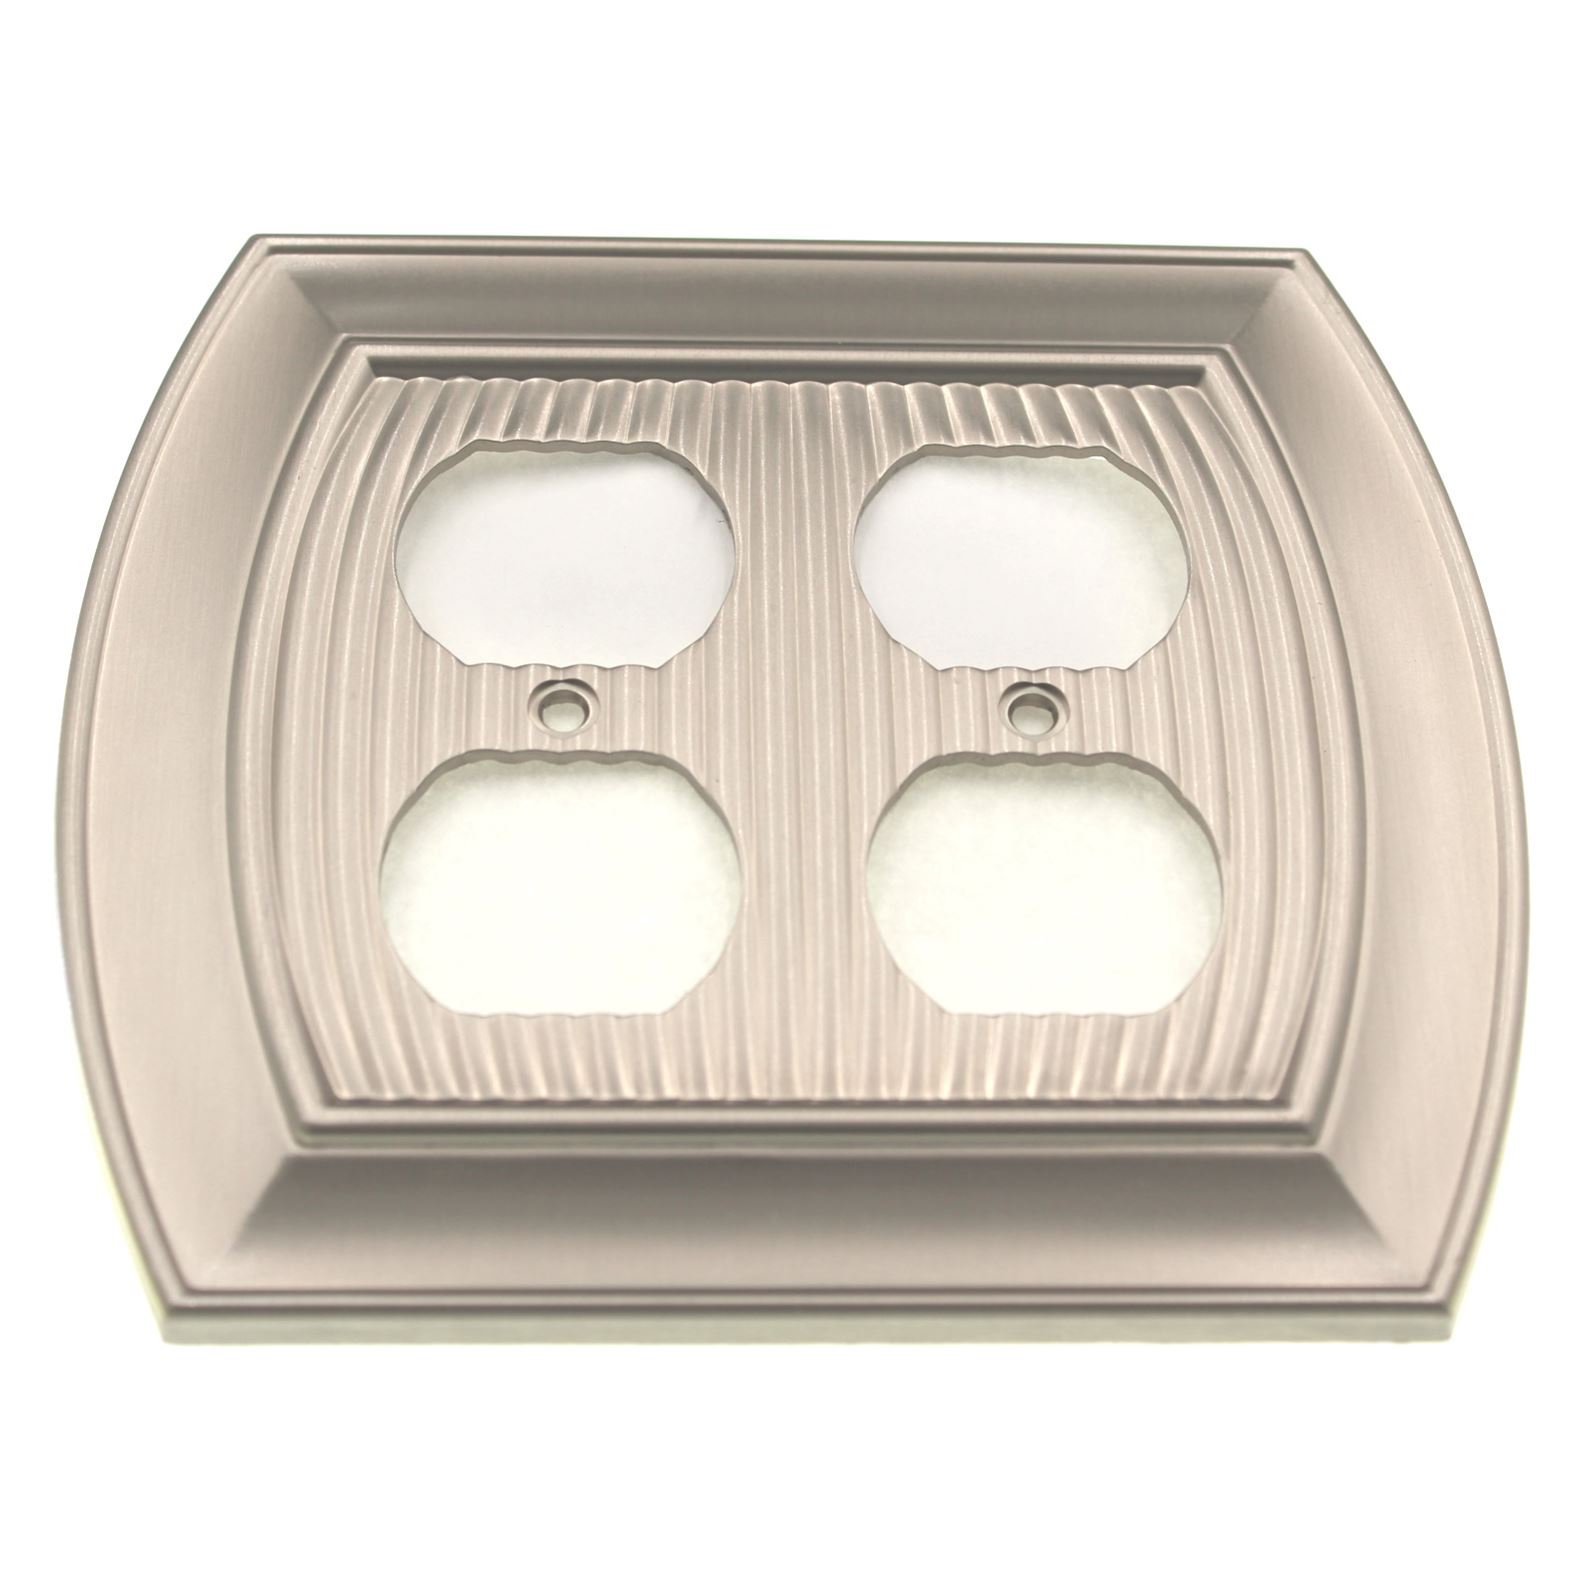 Amerock Sea Grass Satin Nickel 2 Receptacle Outlet Wall Plate BP36537G10